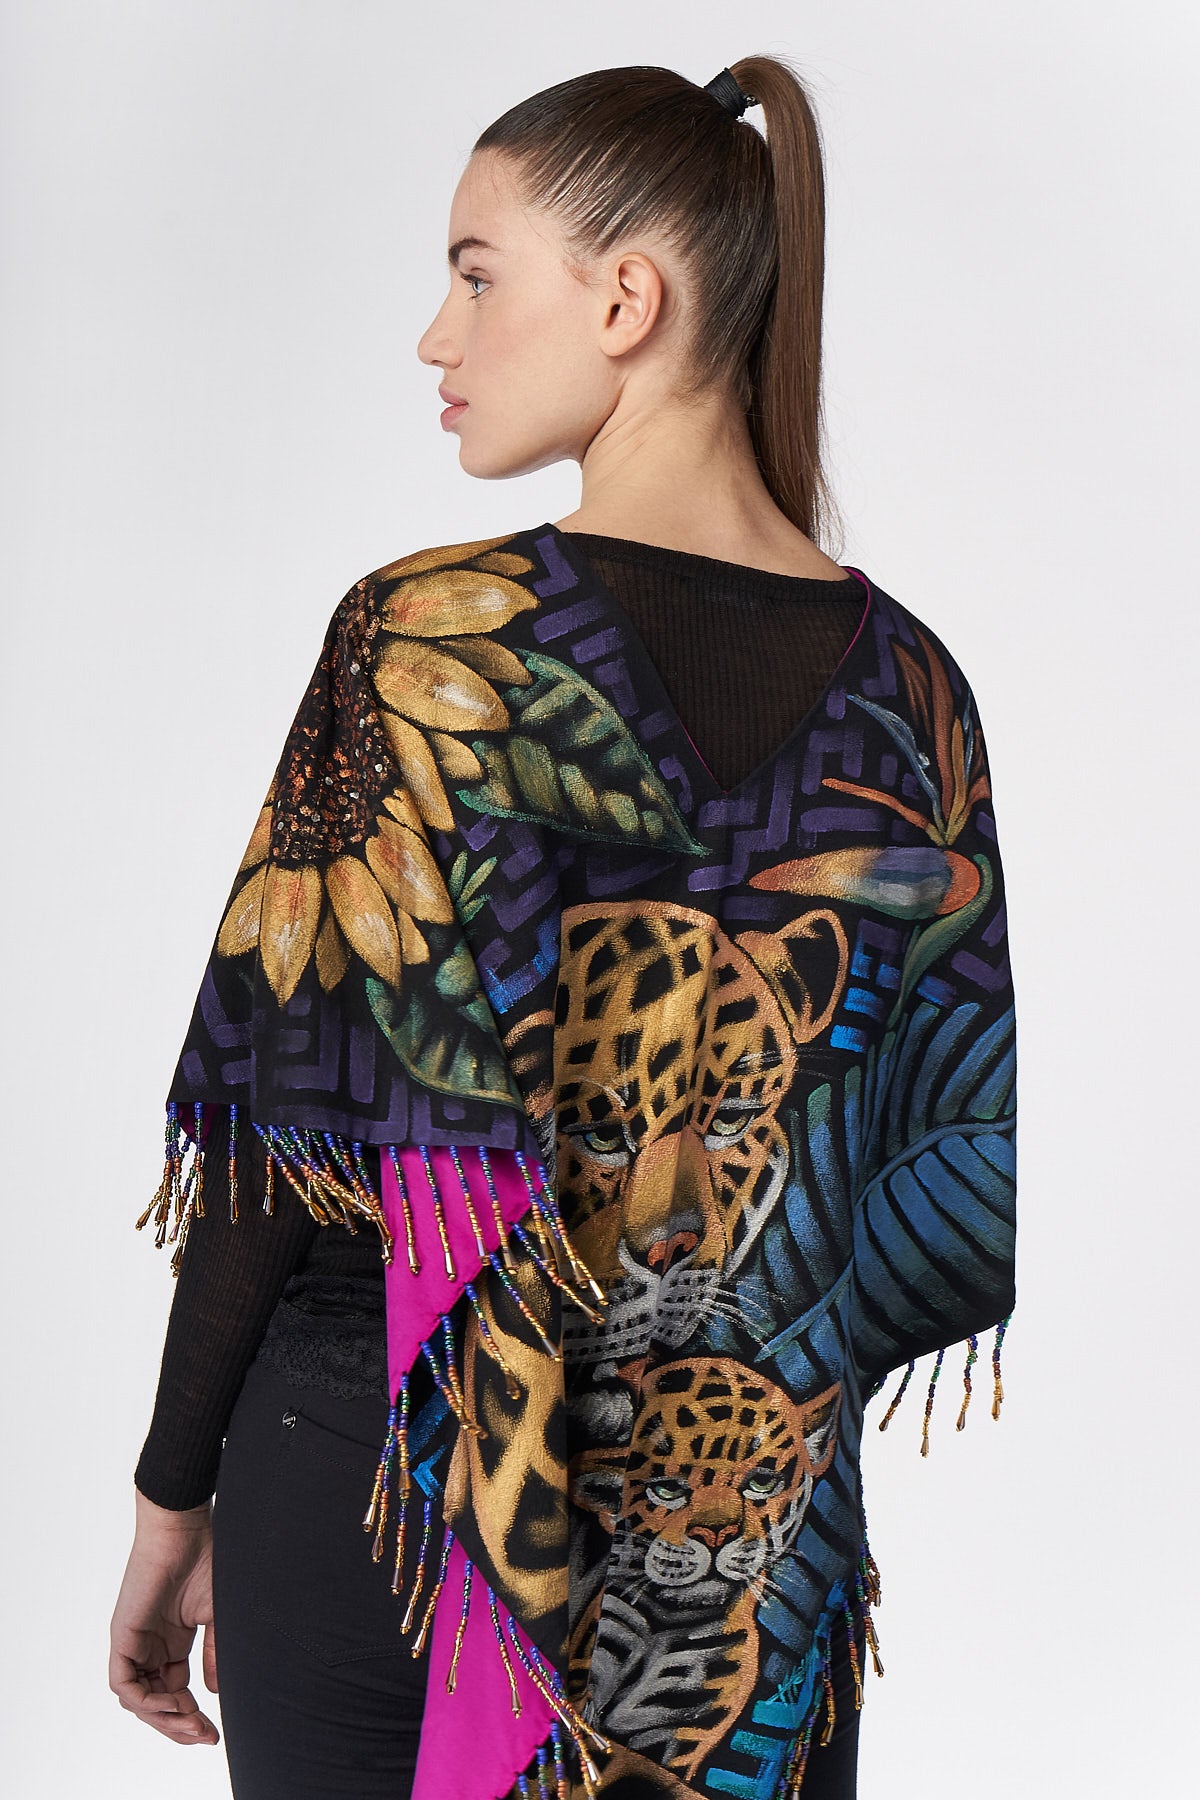 HAND-PAINTED PONCHO WITH BEADED FRINGE - ANIMALES SAGRADOS